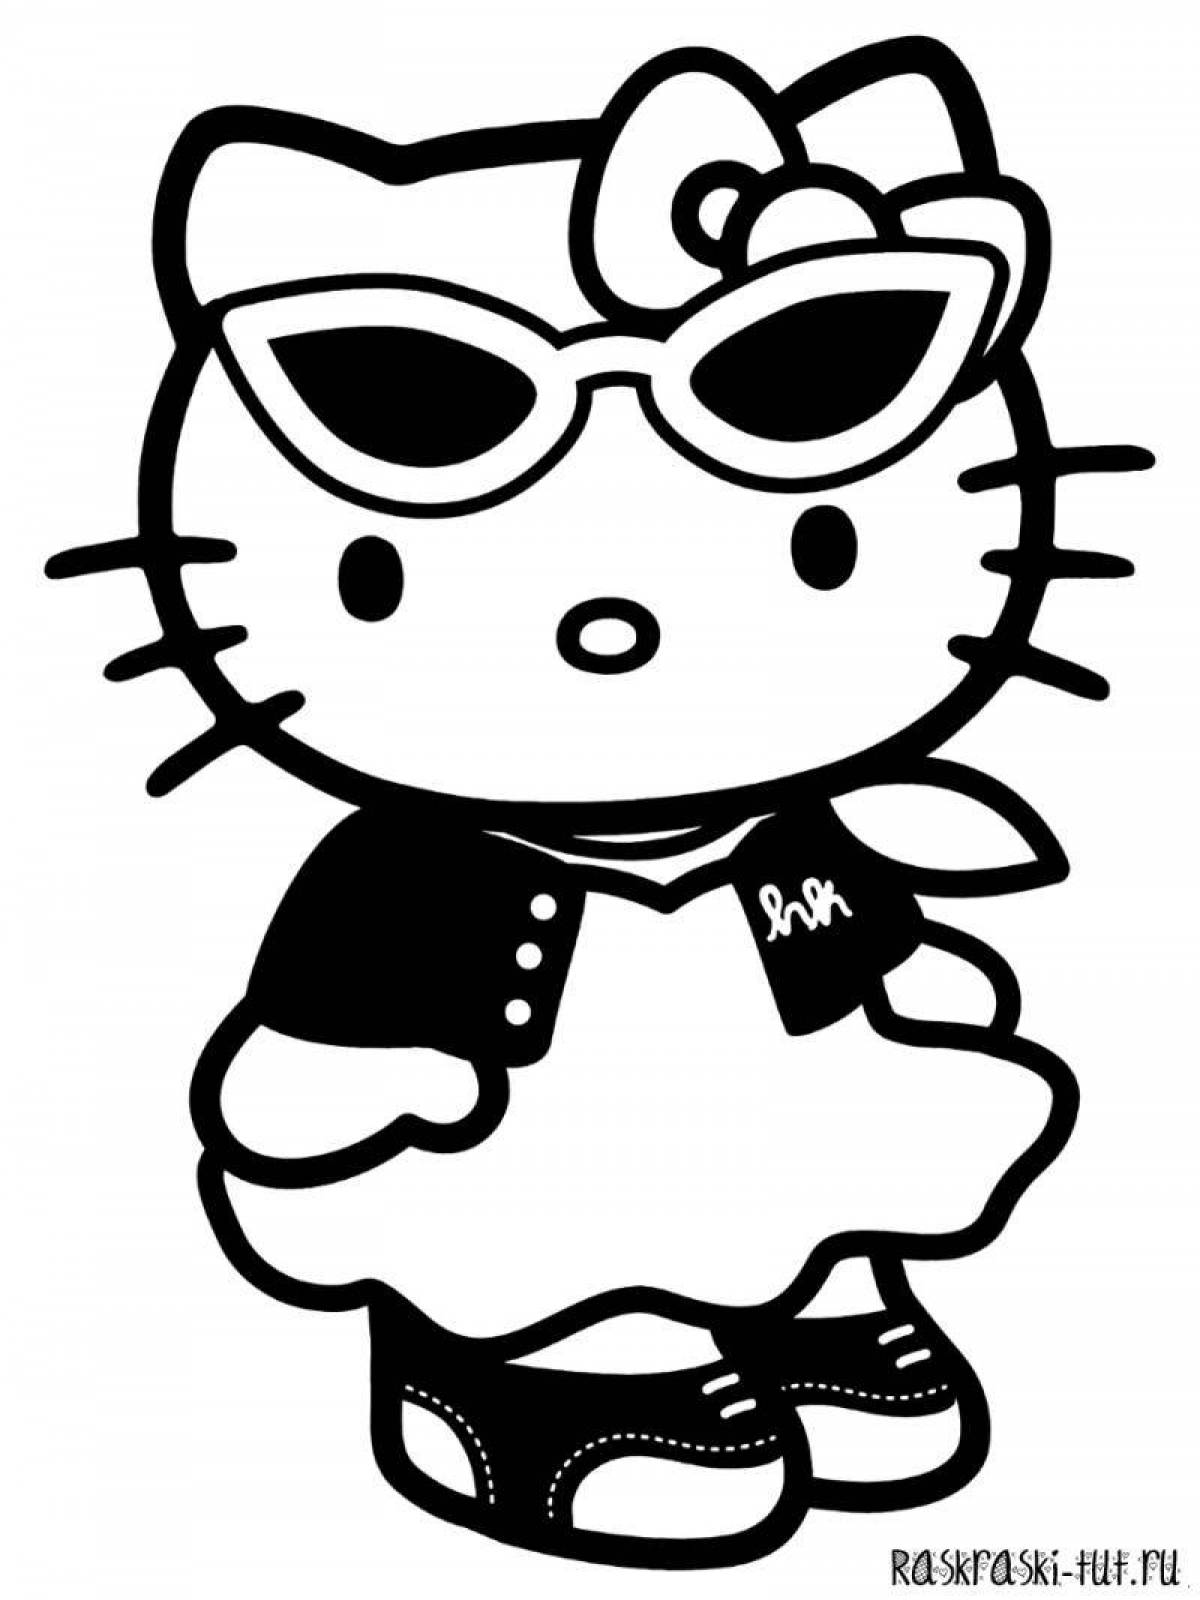 Dazzling little hello kitty kuromi coloring page